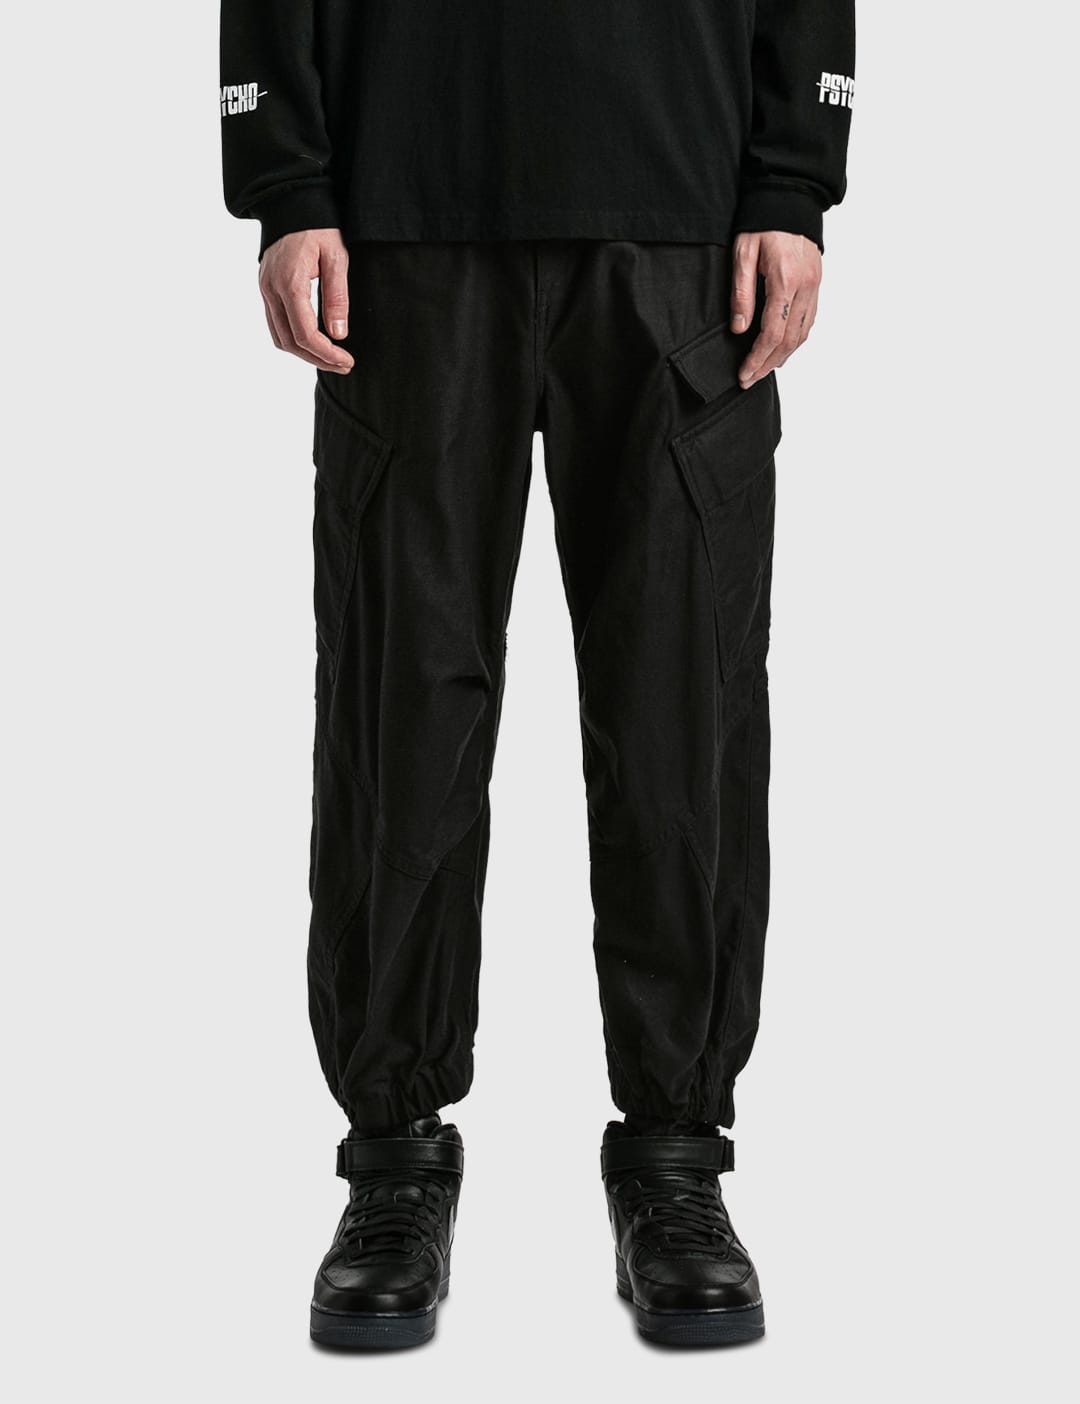 Undercover - BLACK CARGO PANTS | HBX - Globally Curated Fashion